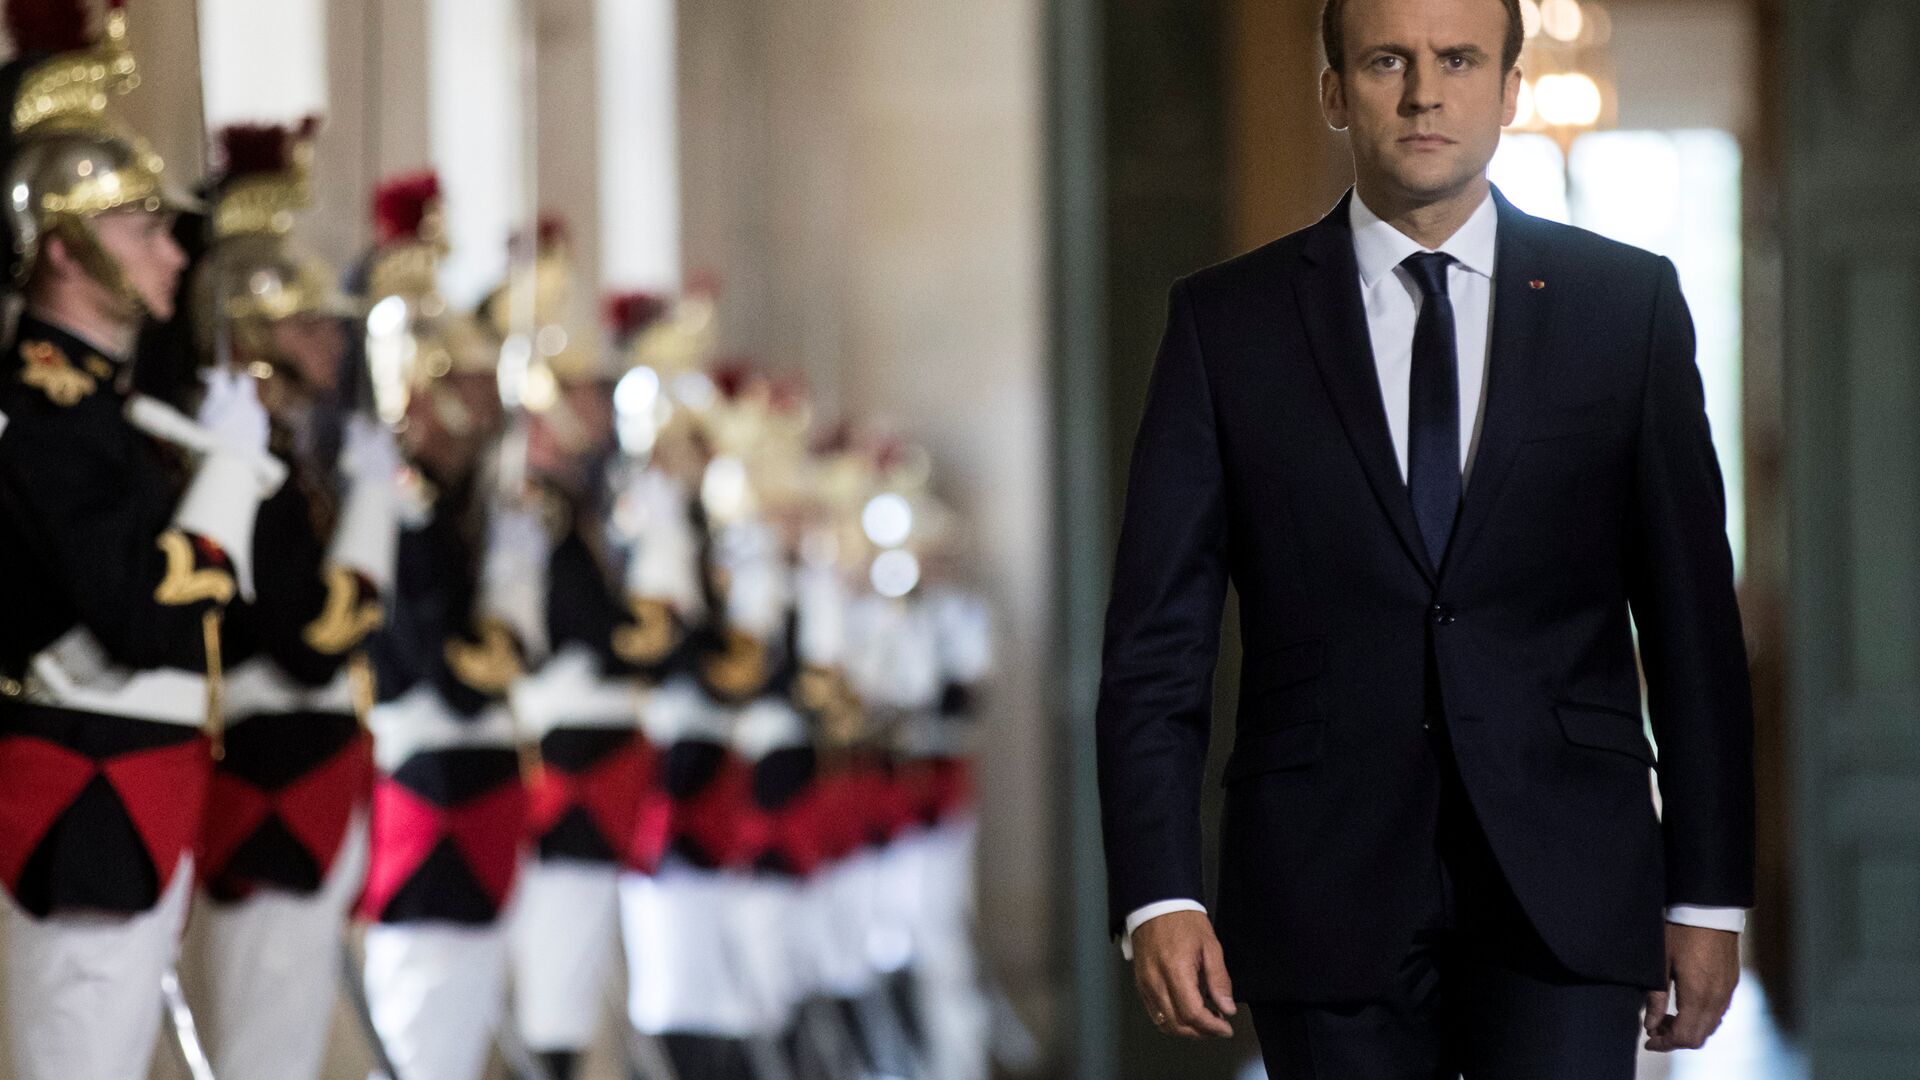 French President Emmanuel Macron walks through the Galerie des Bustes (Busts Gallery) to access the Versailles Palace's hemicycle for a special congress gathering both houses of parliament (National Assembly and Senate), near Paris, France, July 3, 2017.  - Sputnik International, 1920, 30.10.2021